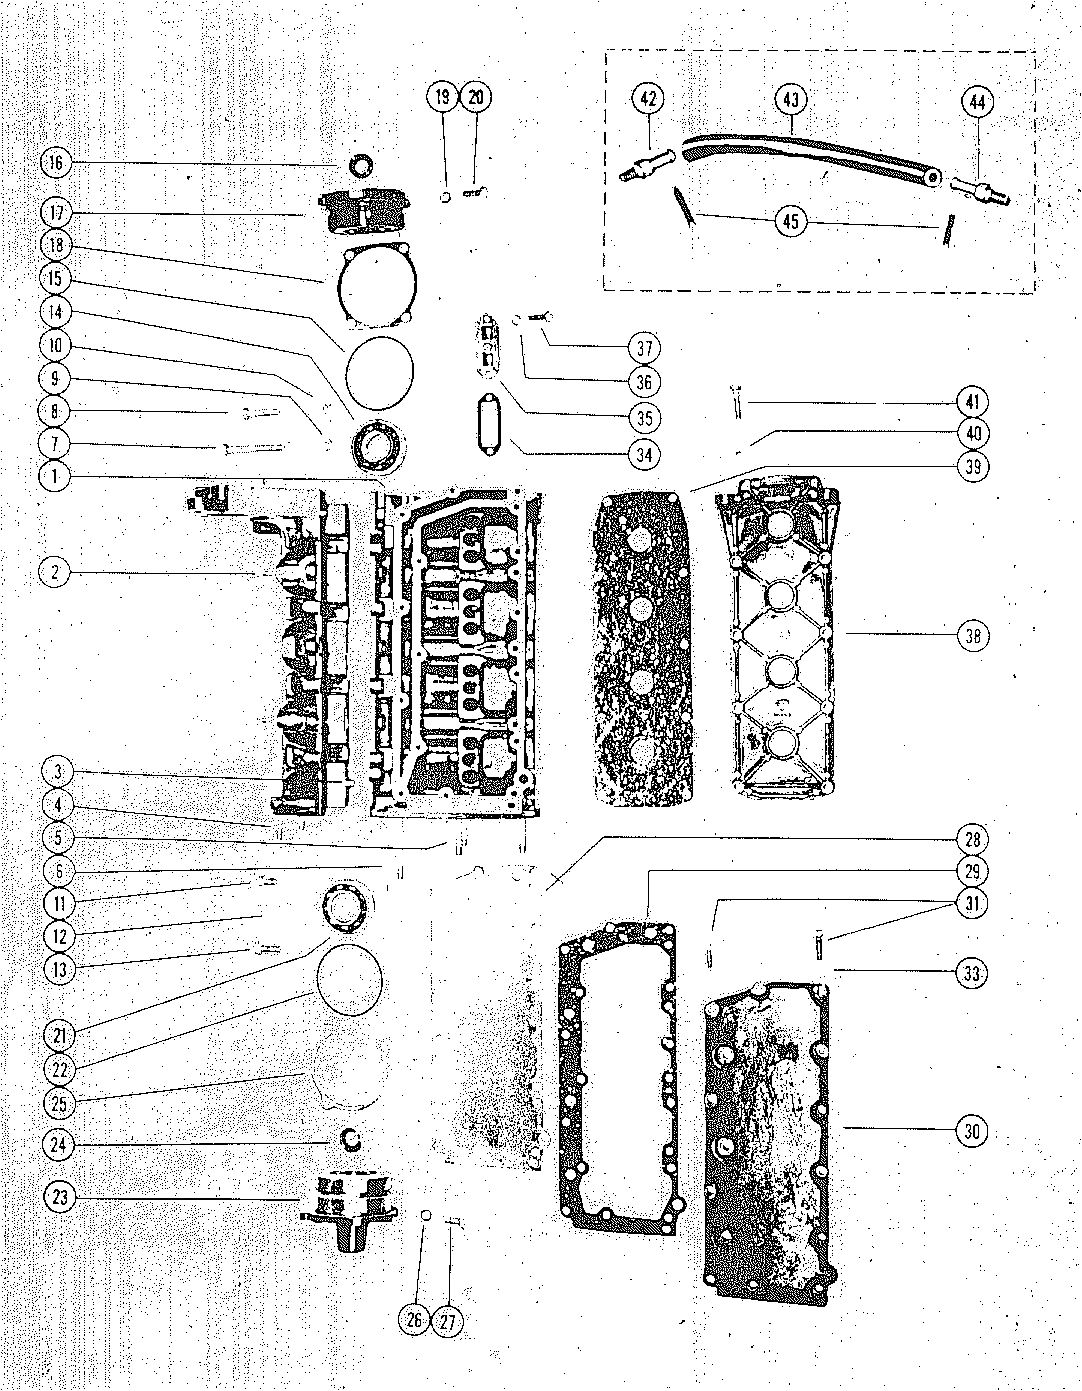 MARK MARK 55 CYLINDER BLOCK AND CRANKCASE ASSEMBLY